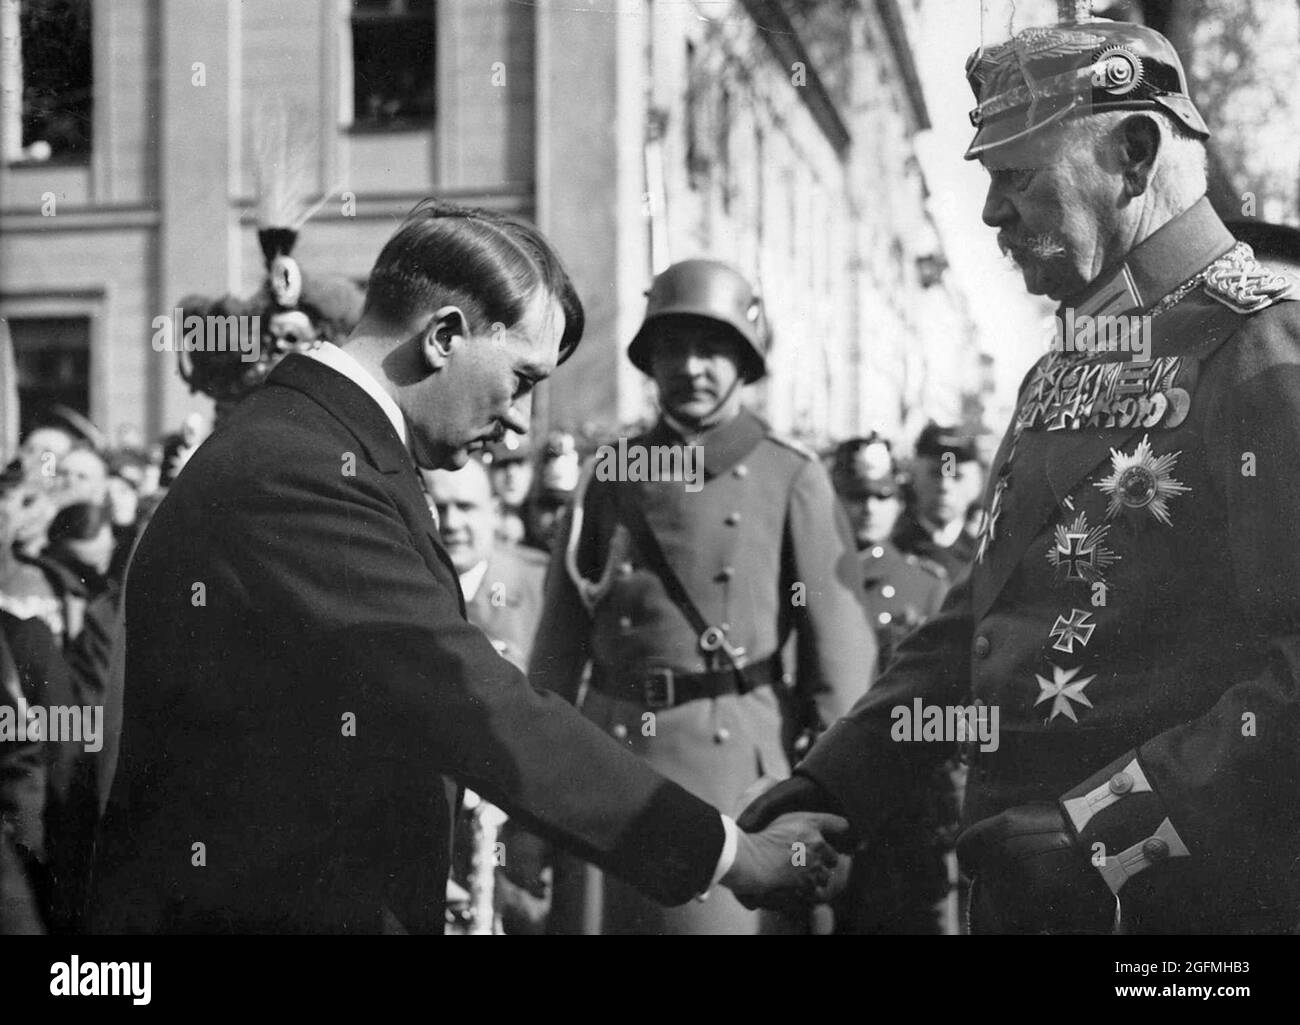 Hitler shaking hands and bowing to Paul von Hindenburg on the Day of Potsdam, 21 March 1933. This seeming gesture of respect and humility did much to allay HIndenberg's and the public's fears and hence allowed Hitler to persuade the Reichstag to pass The Enabling Act (which gave Hitler the right to act by decree without parliament) two days later with little opposition.Credit: German Bundesarchiv Stock Photo